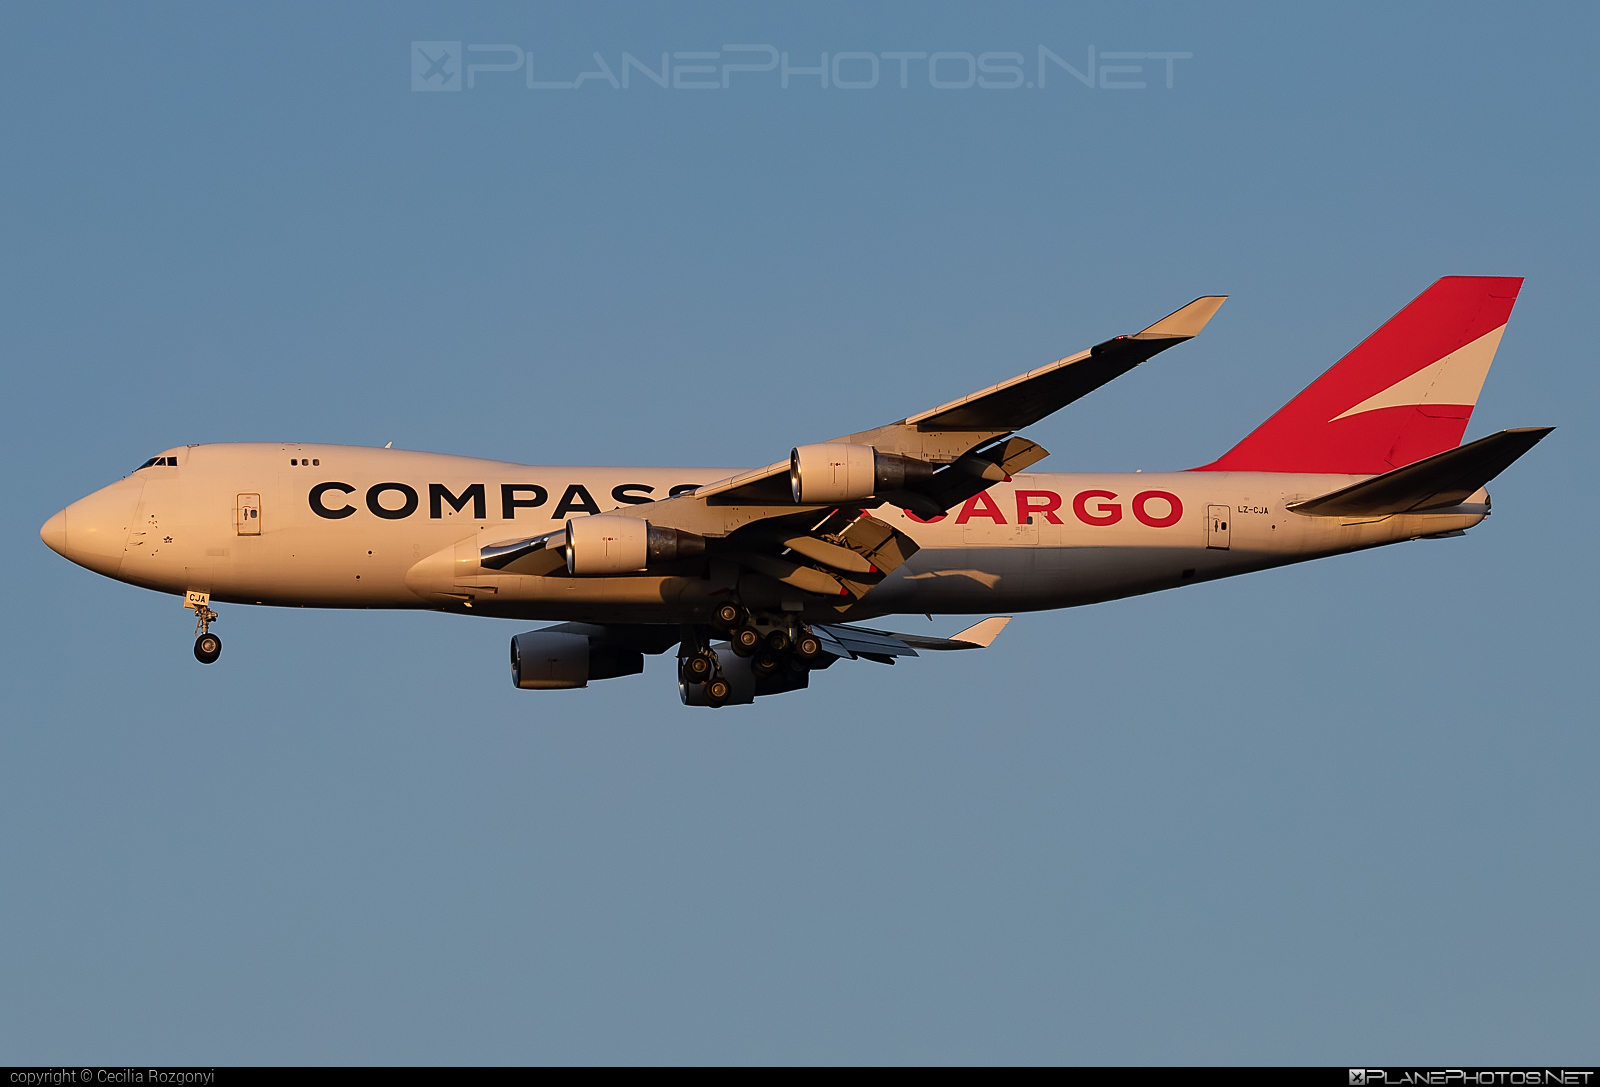 Boeing 747-400F - LZ-CJA operated by Compass Cargo Airlines #b747 #boeing #boeing747 #compassCargoAirlines #jumbo